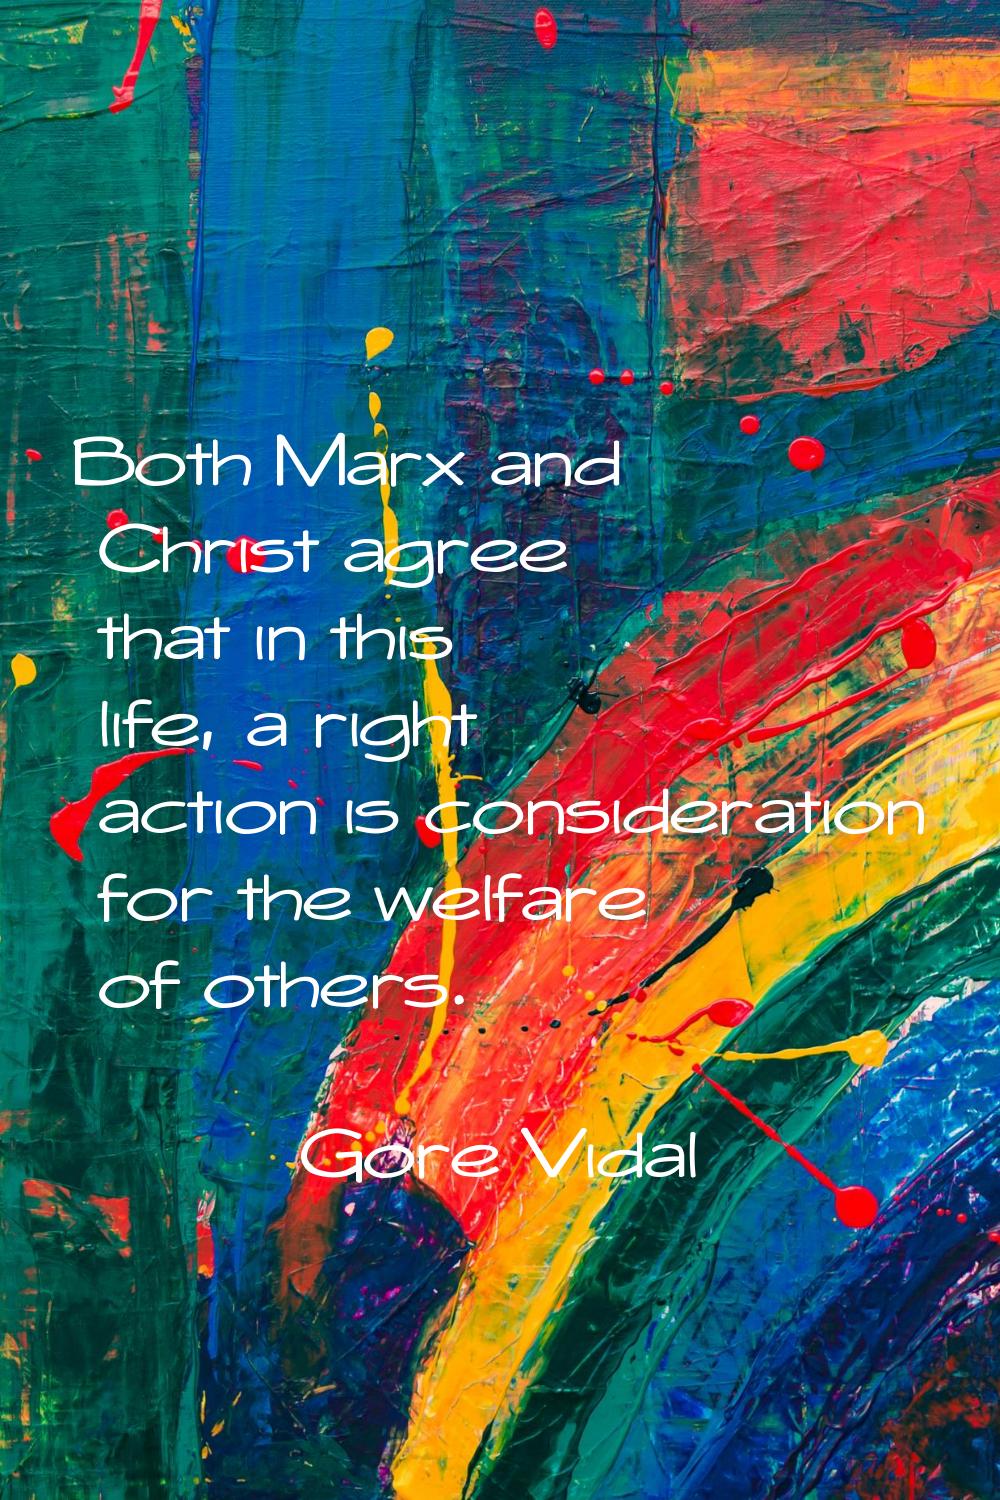 Both Marx and Christ agree that in this life, a right action is consideration for the welfare of ot